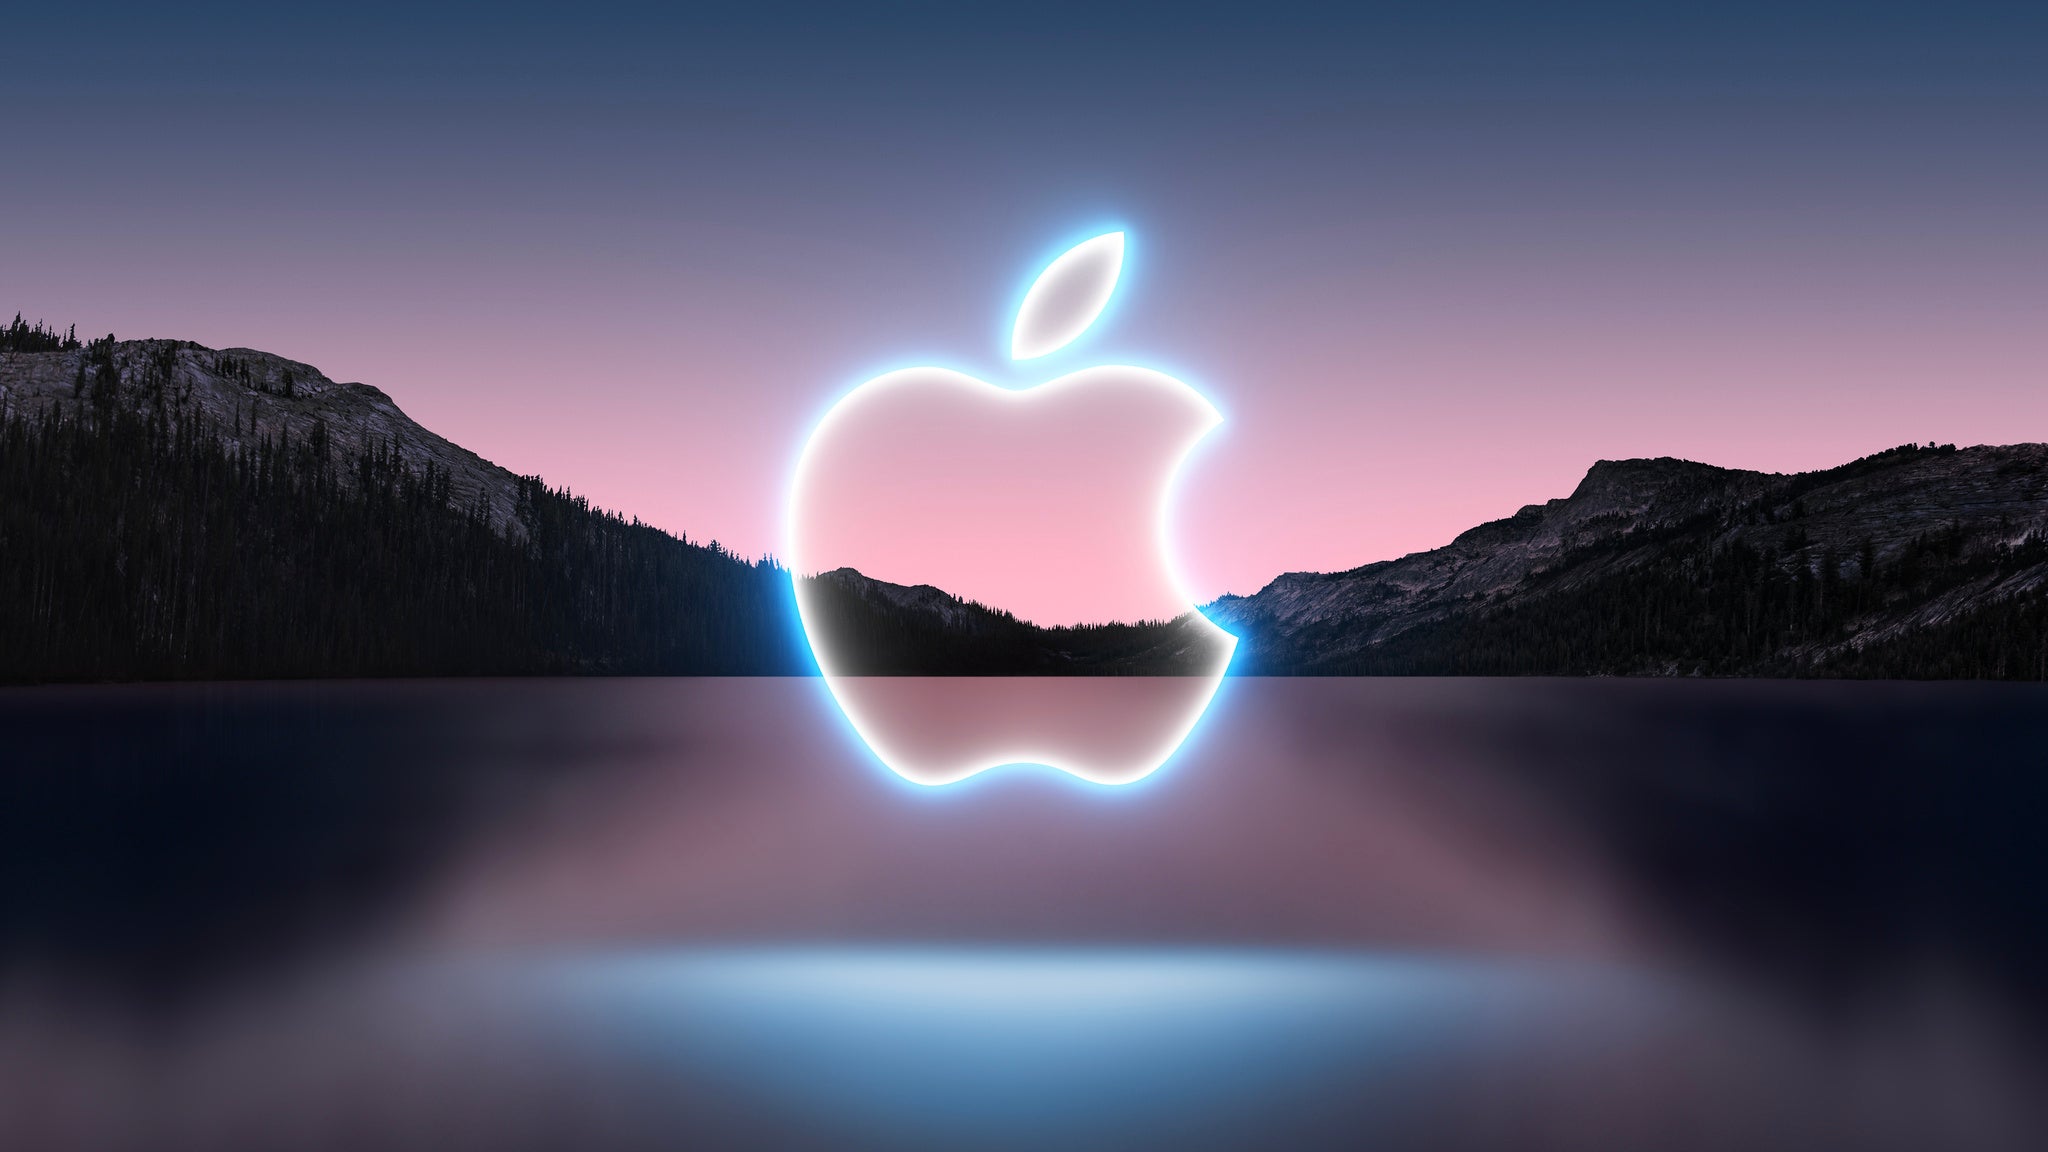 5 Highlights from the Apple Event